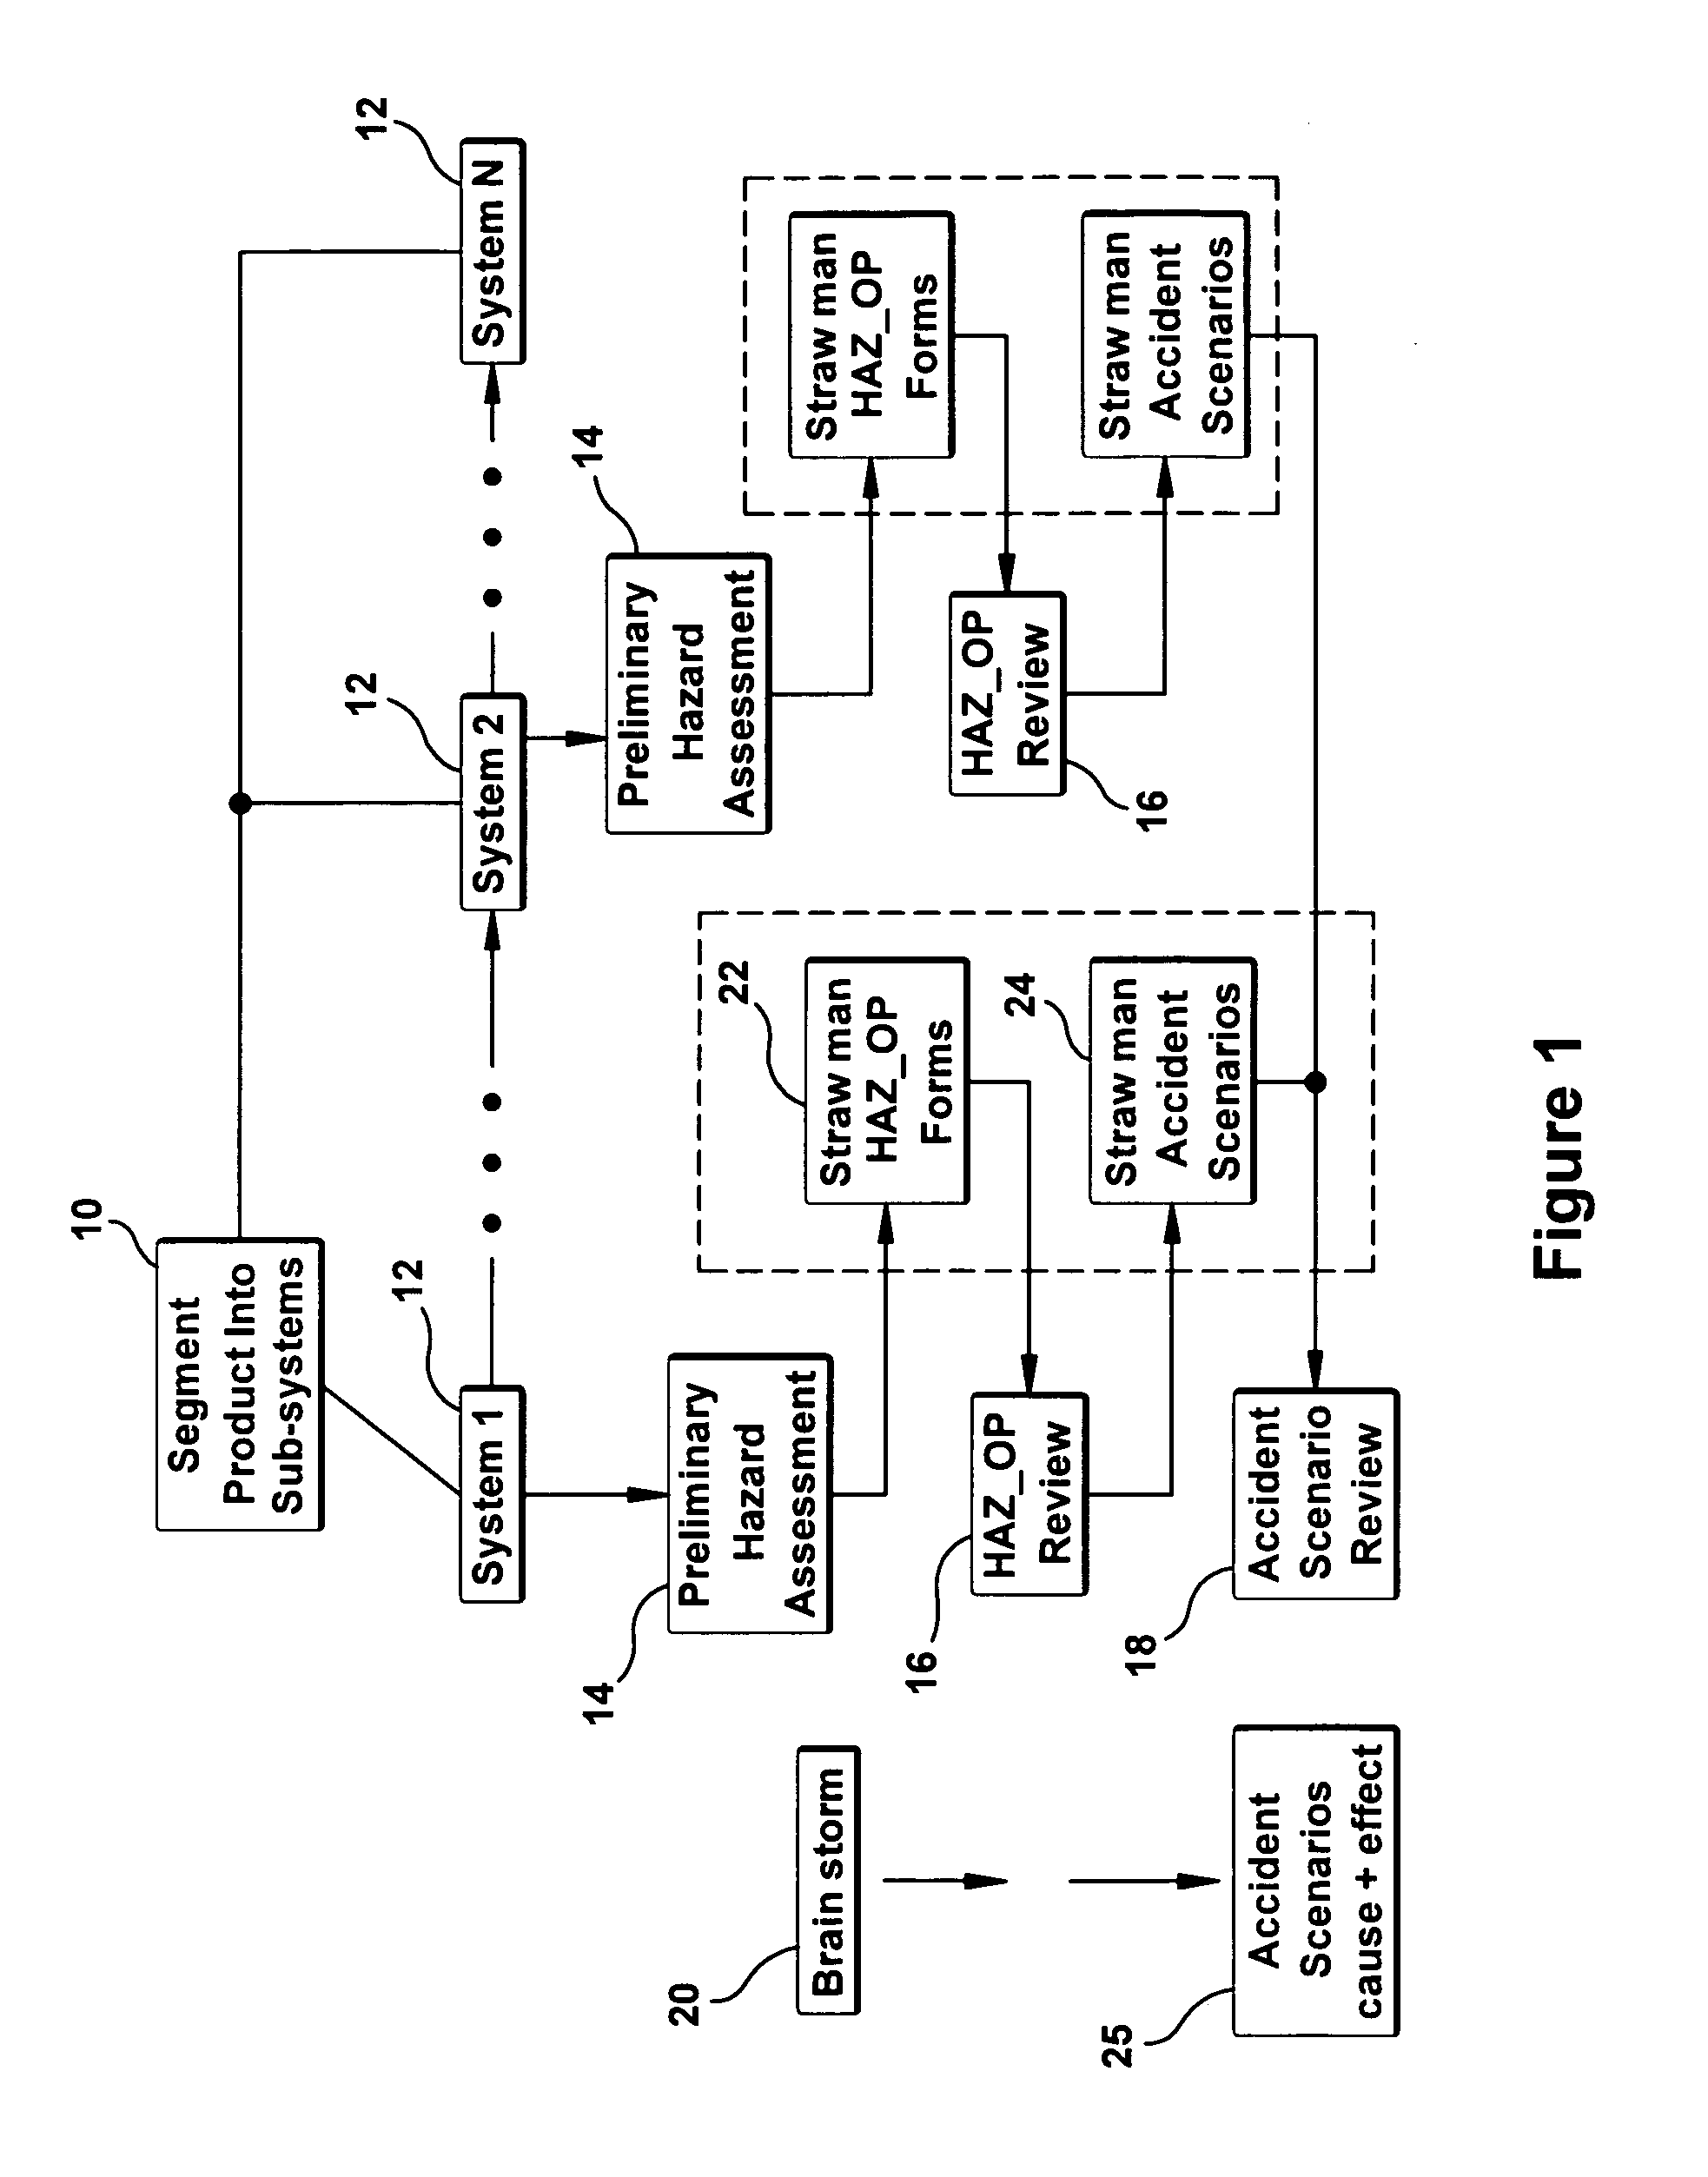 Method for assessing reliability requirements of a safety instrumented control function